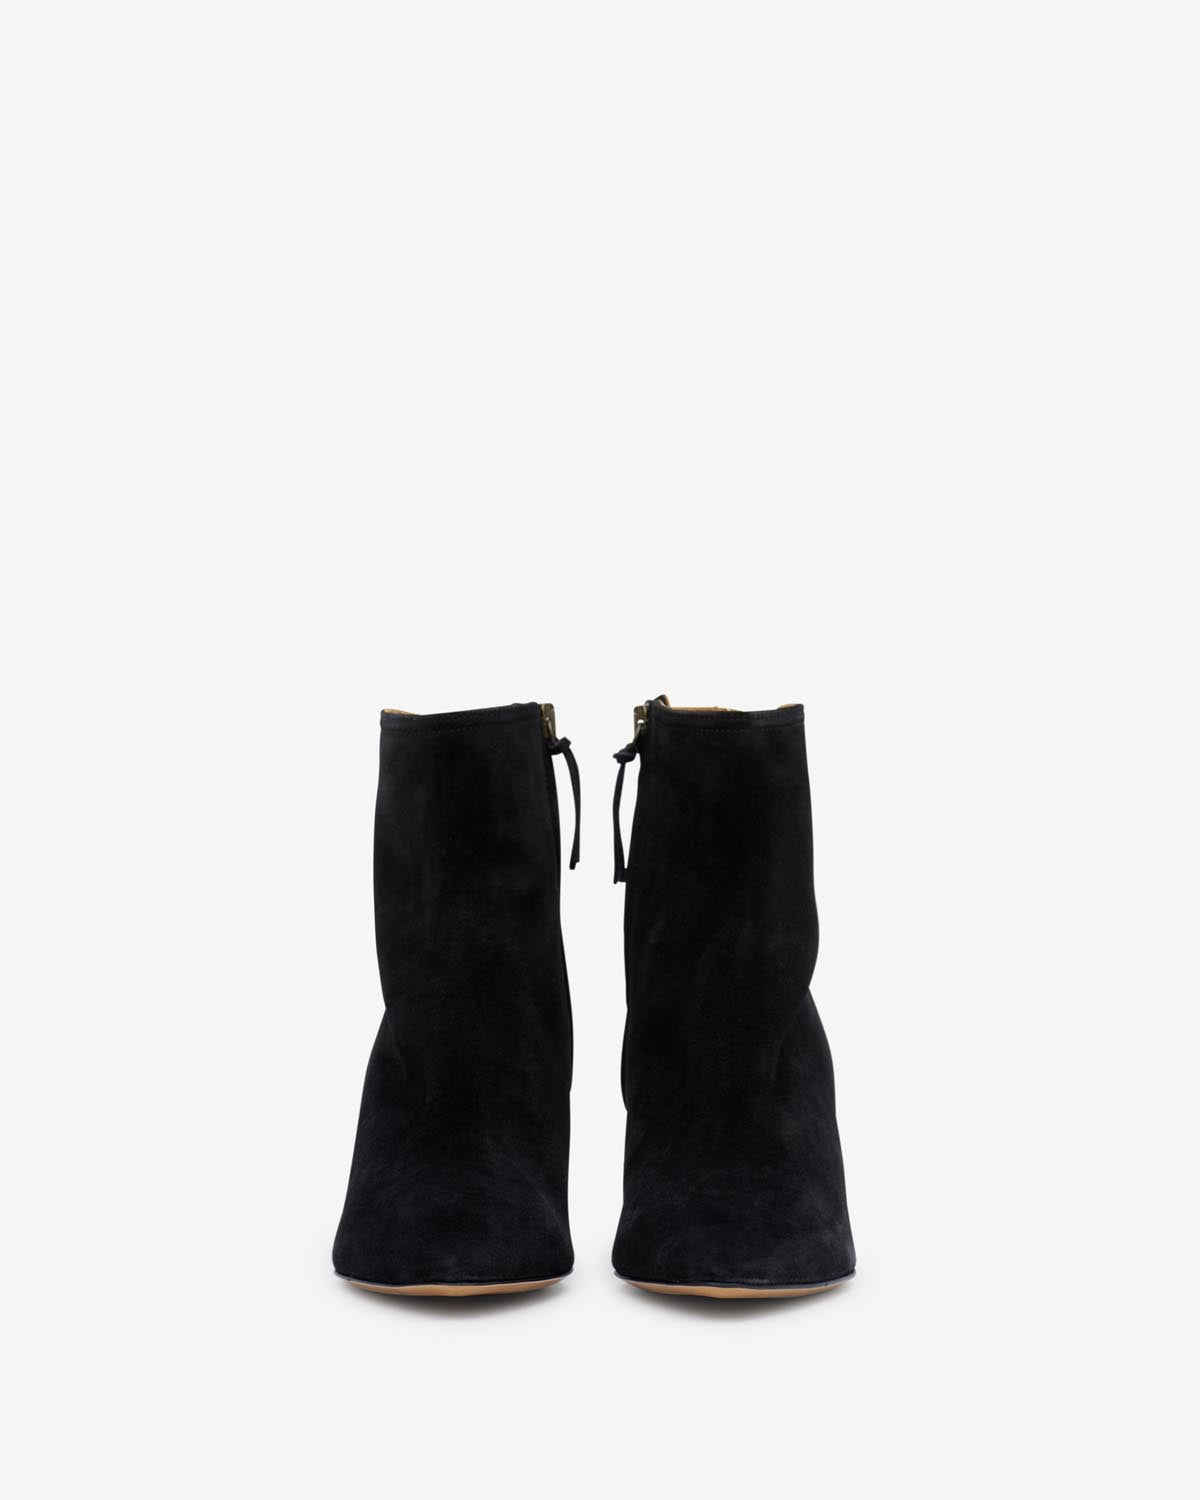 Deone boots Woman Black 4